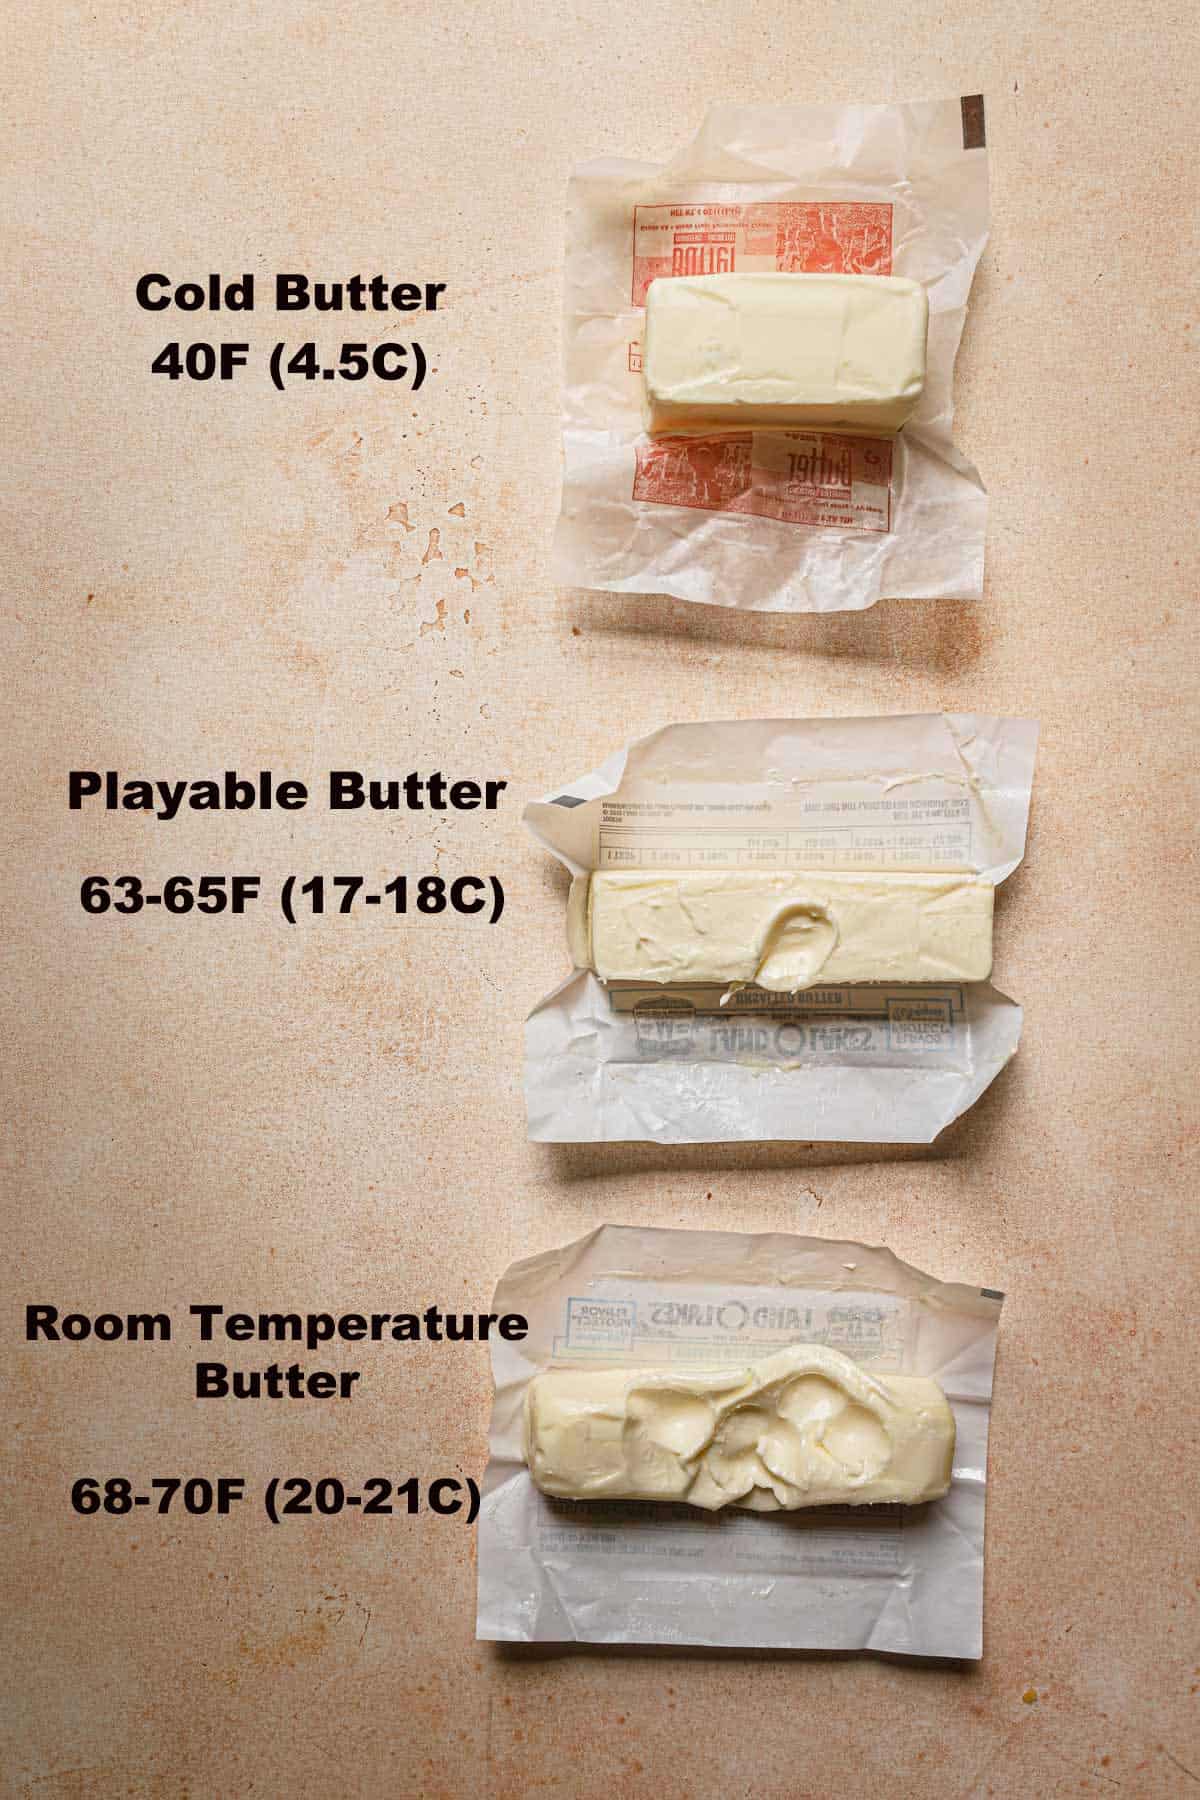 the three phases of butter.